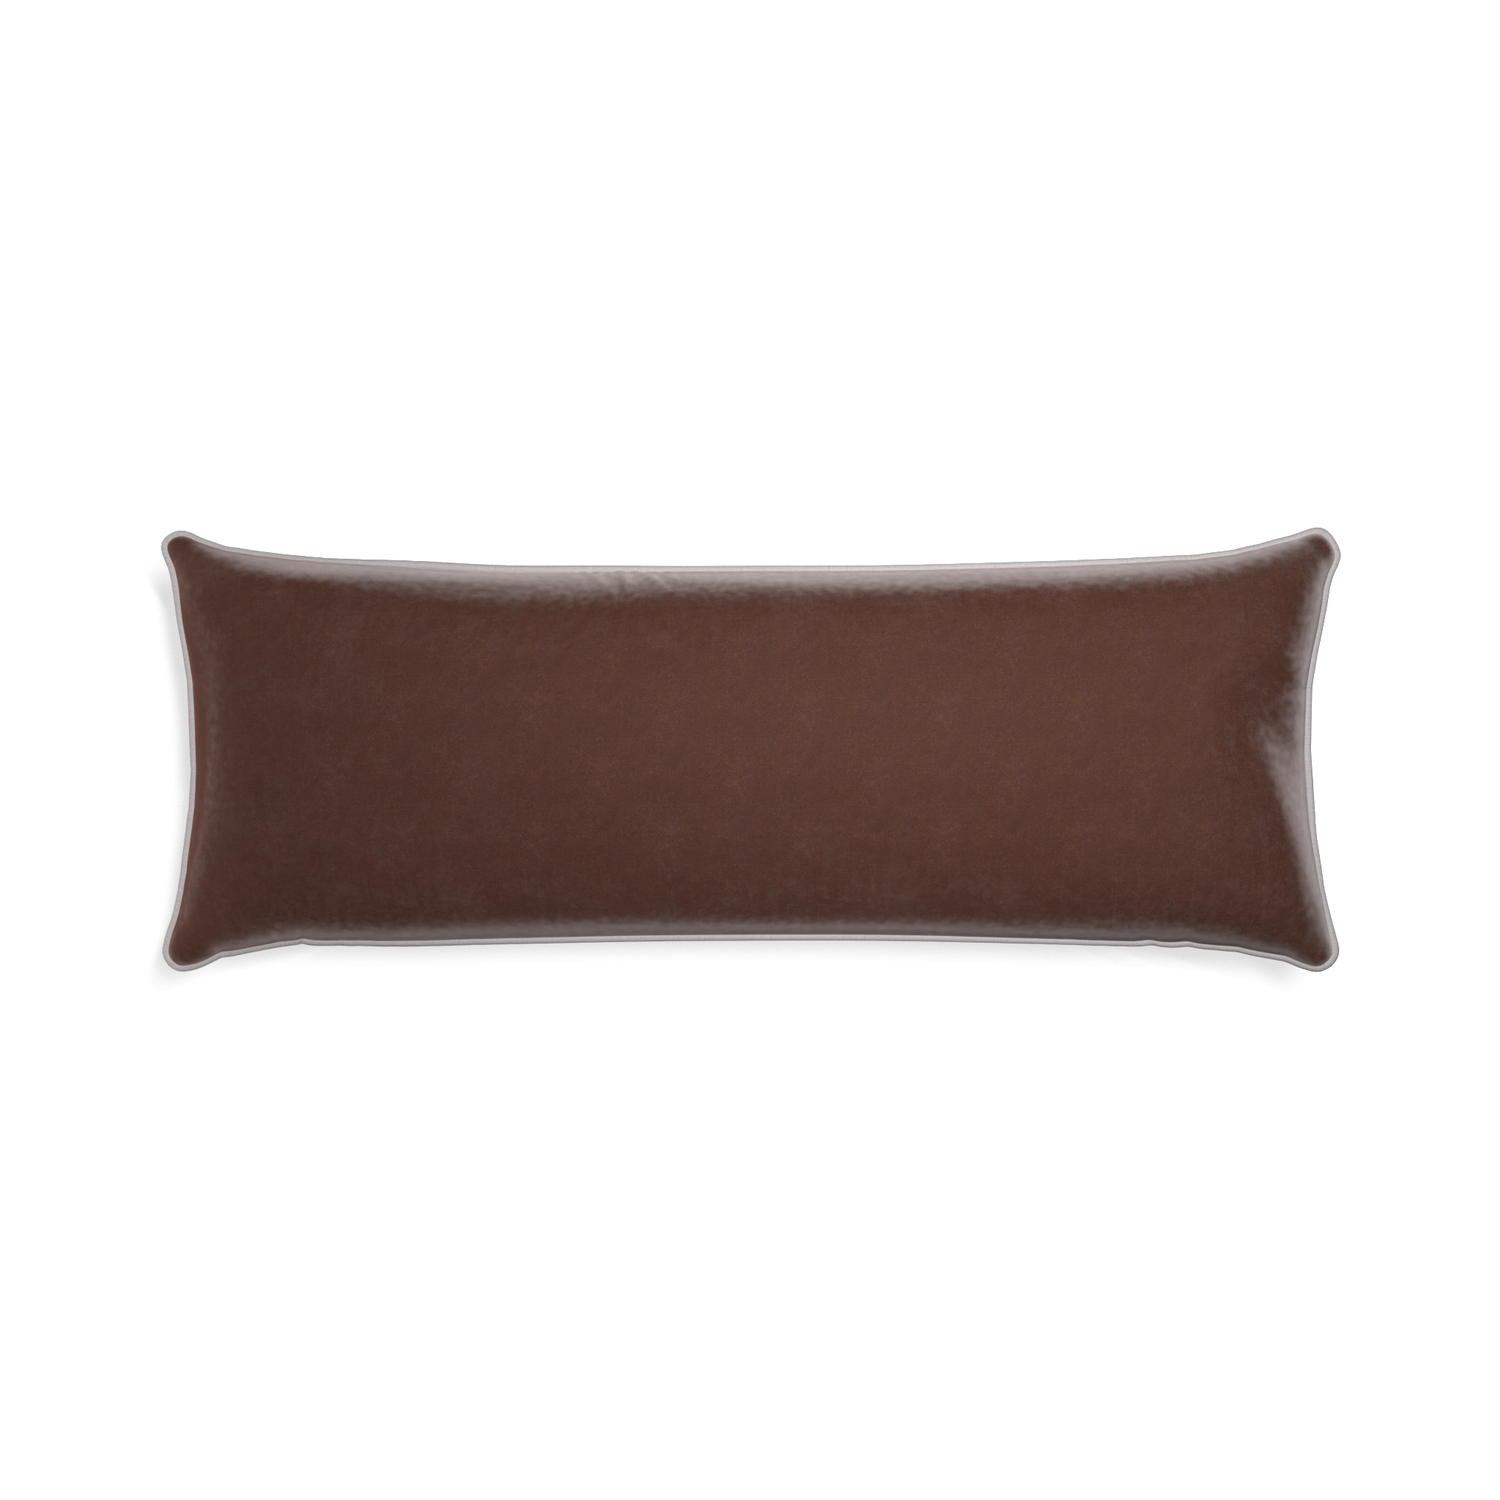 rectangle brown velvet pillow with grey piping